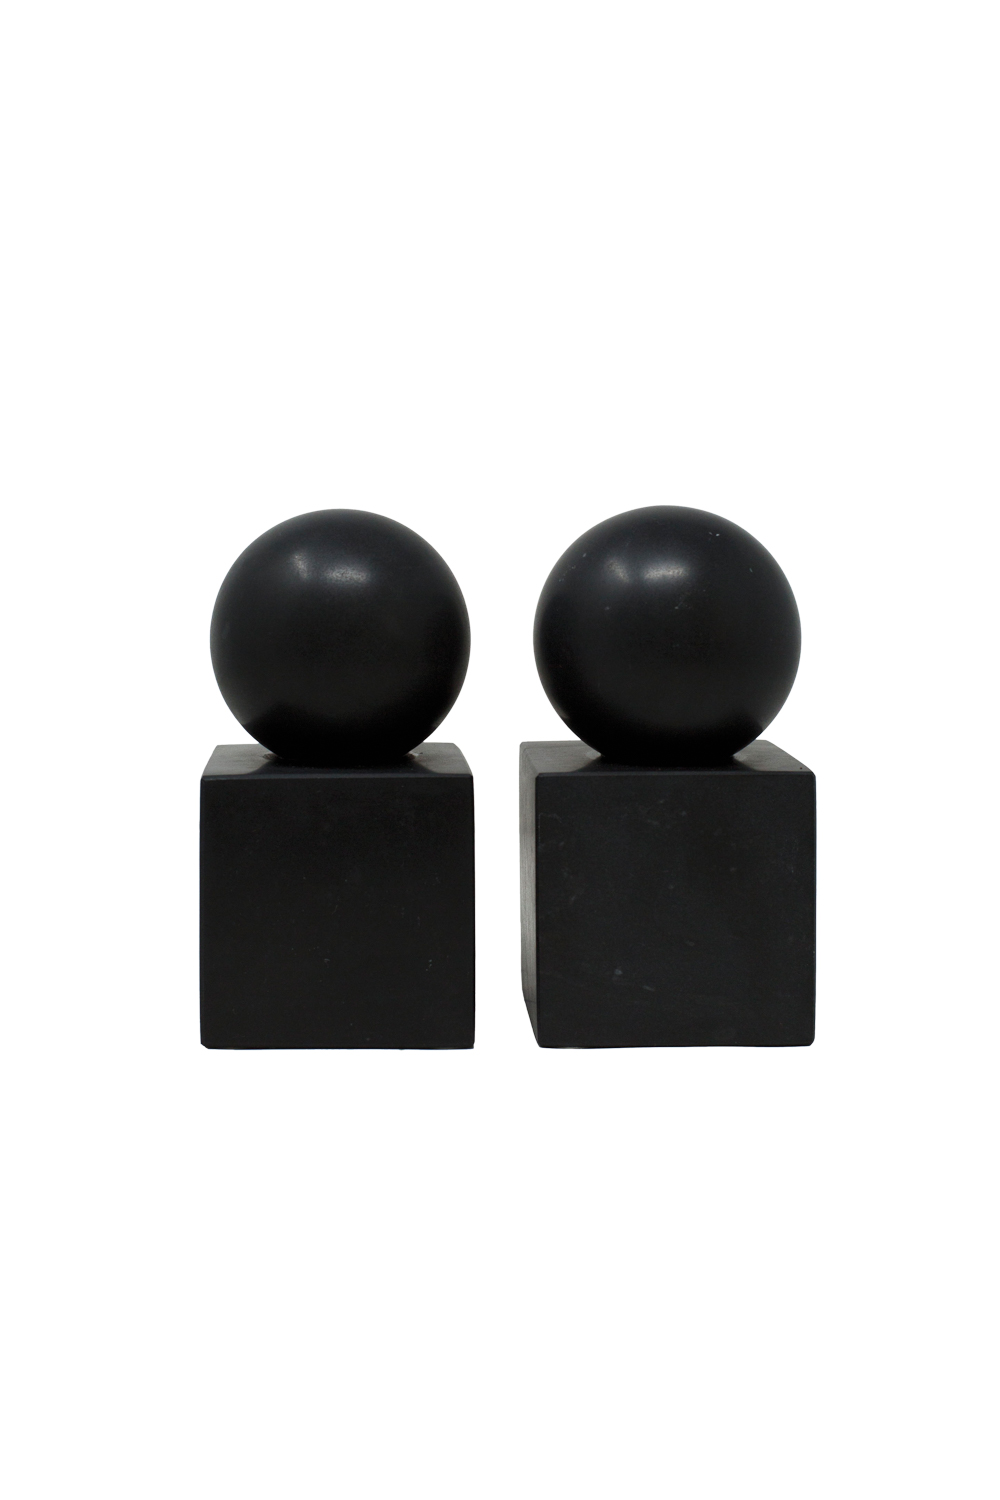 Silo of black-marble bookends recommended by Sherrell Neal